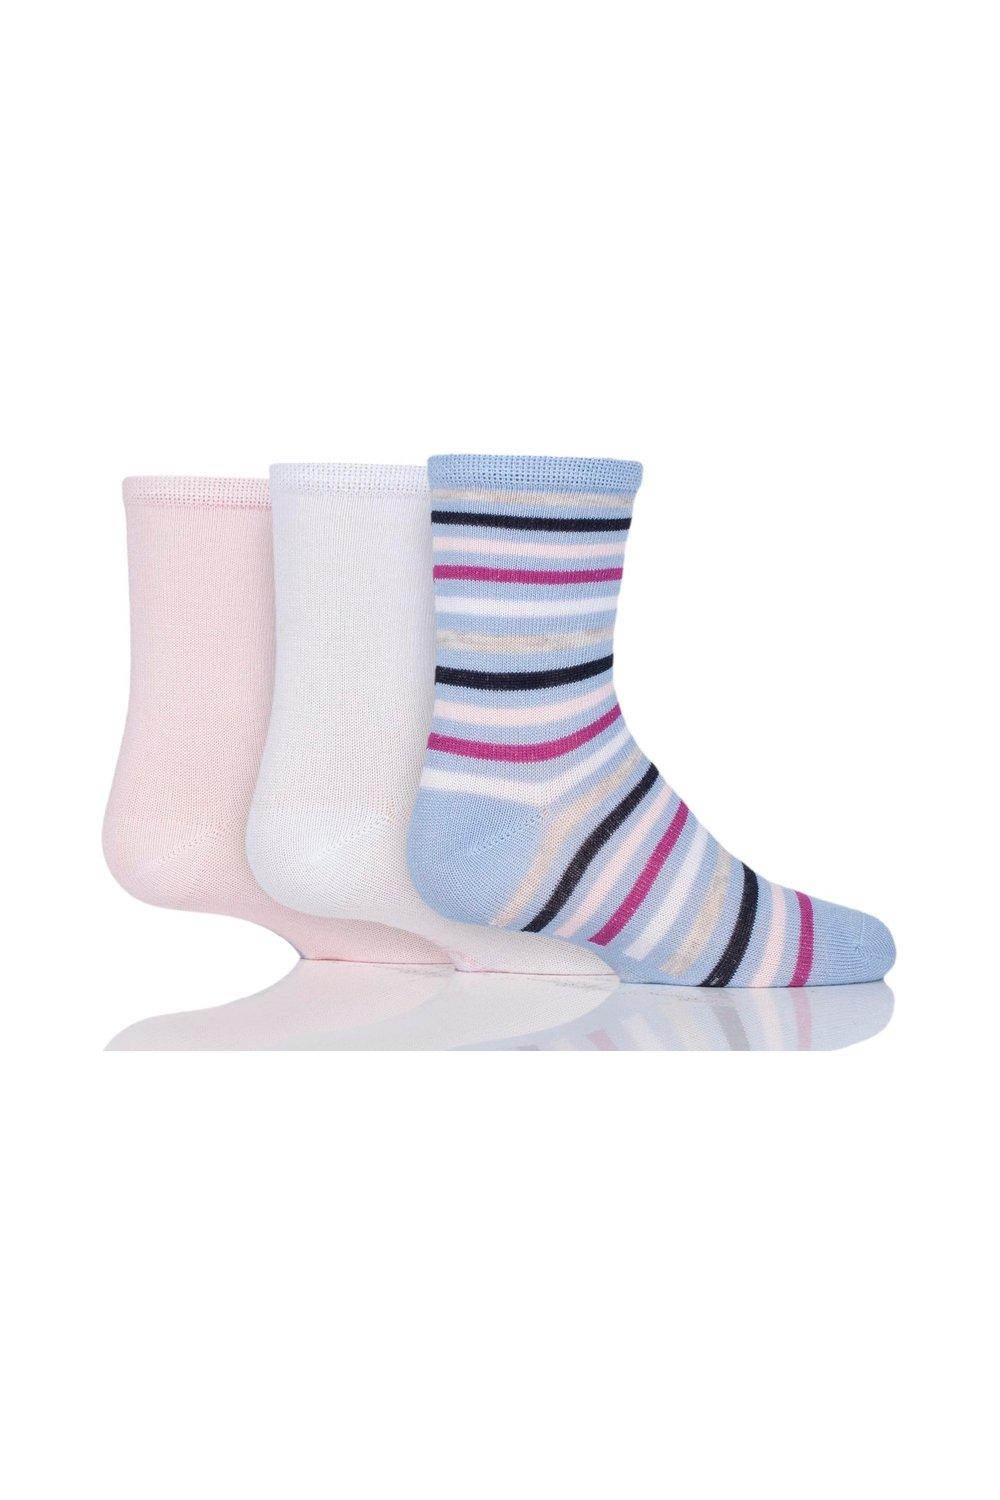 3 Pair Plain and Stripe Bamboo Socks with Smooth Toe Seams